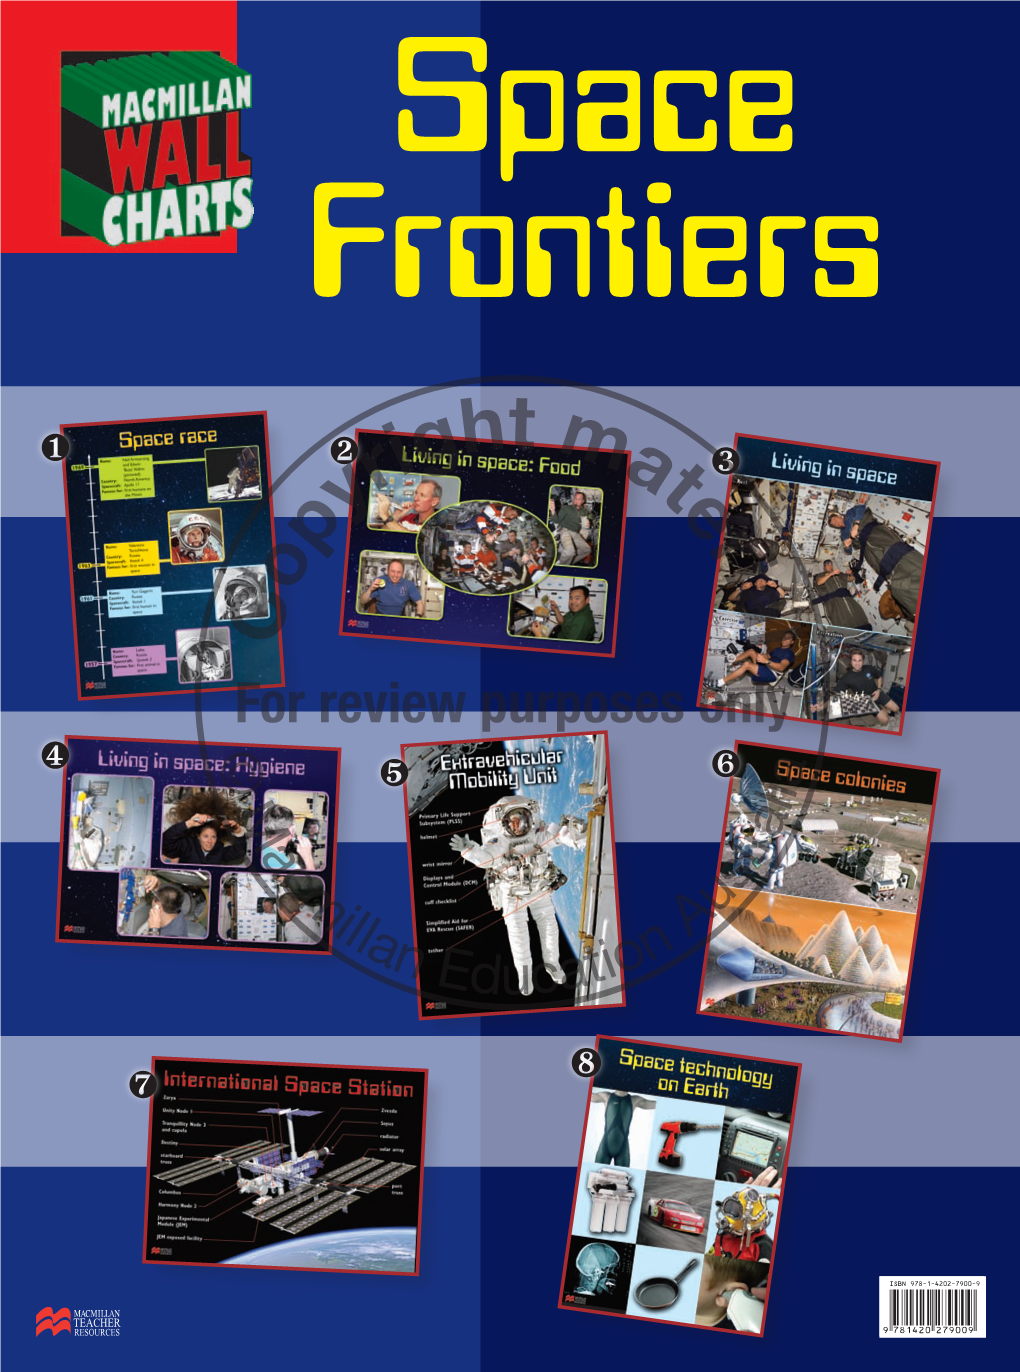 Space Frontiers in the Classroom